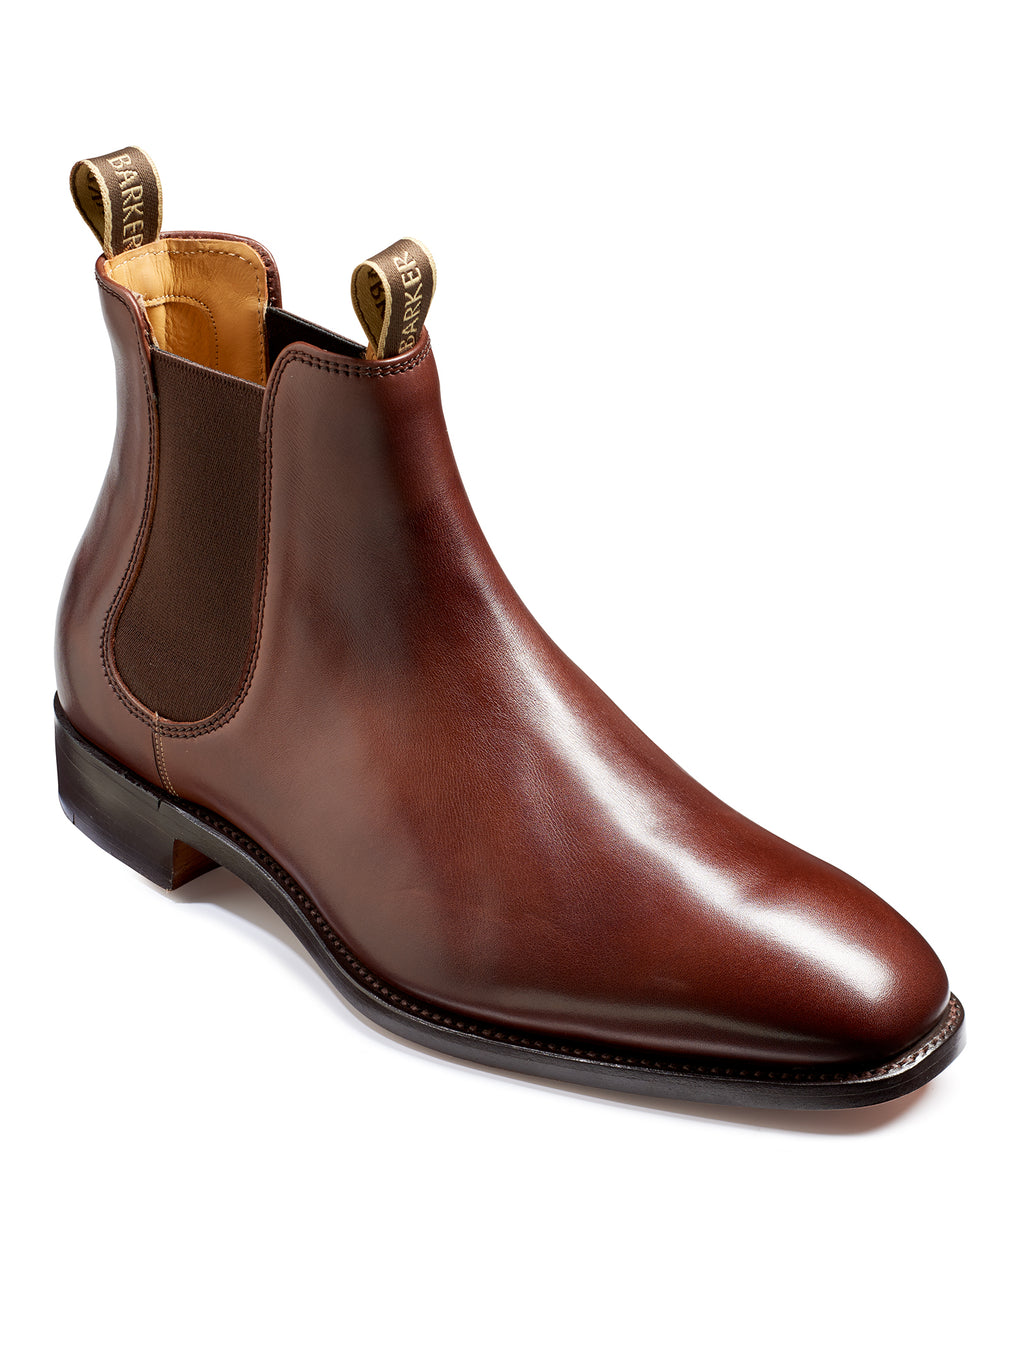 walnut calf mansfield chelsea boot from barker shoes